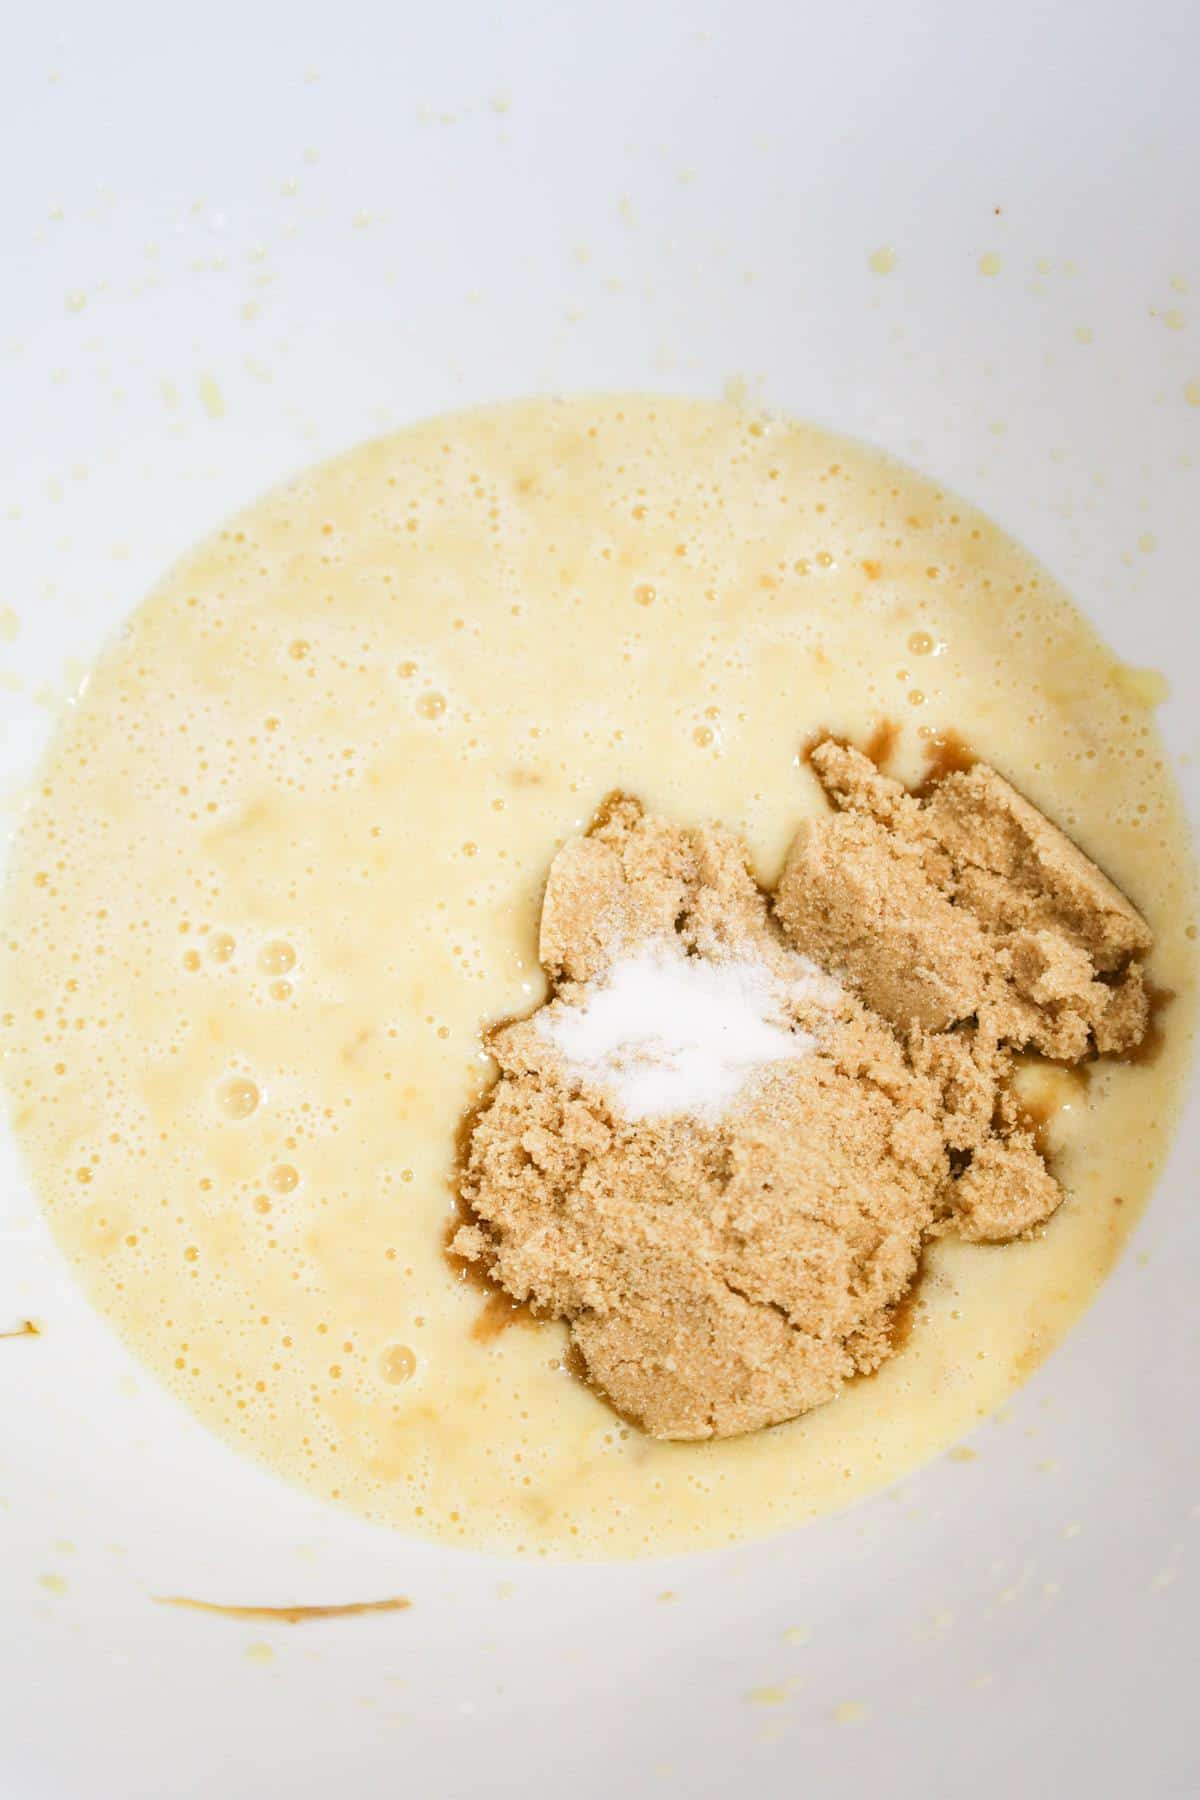 salt and brown sugar on top of creamy banana mixture in a mixing bowl